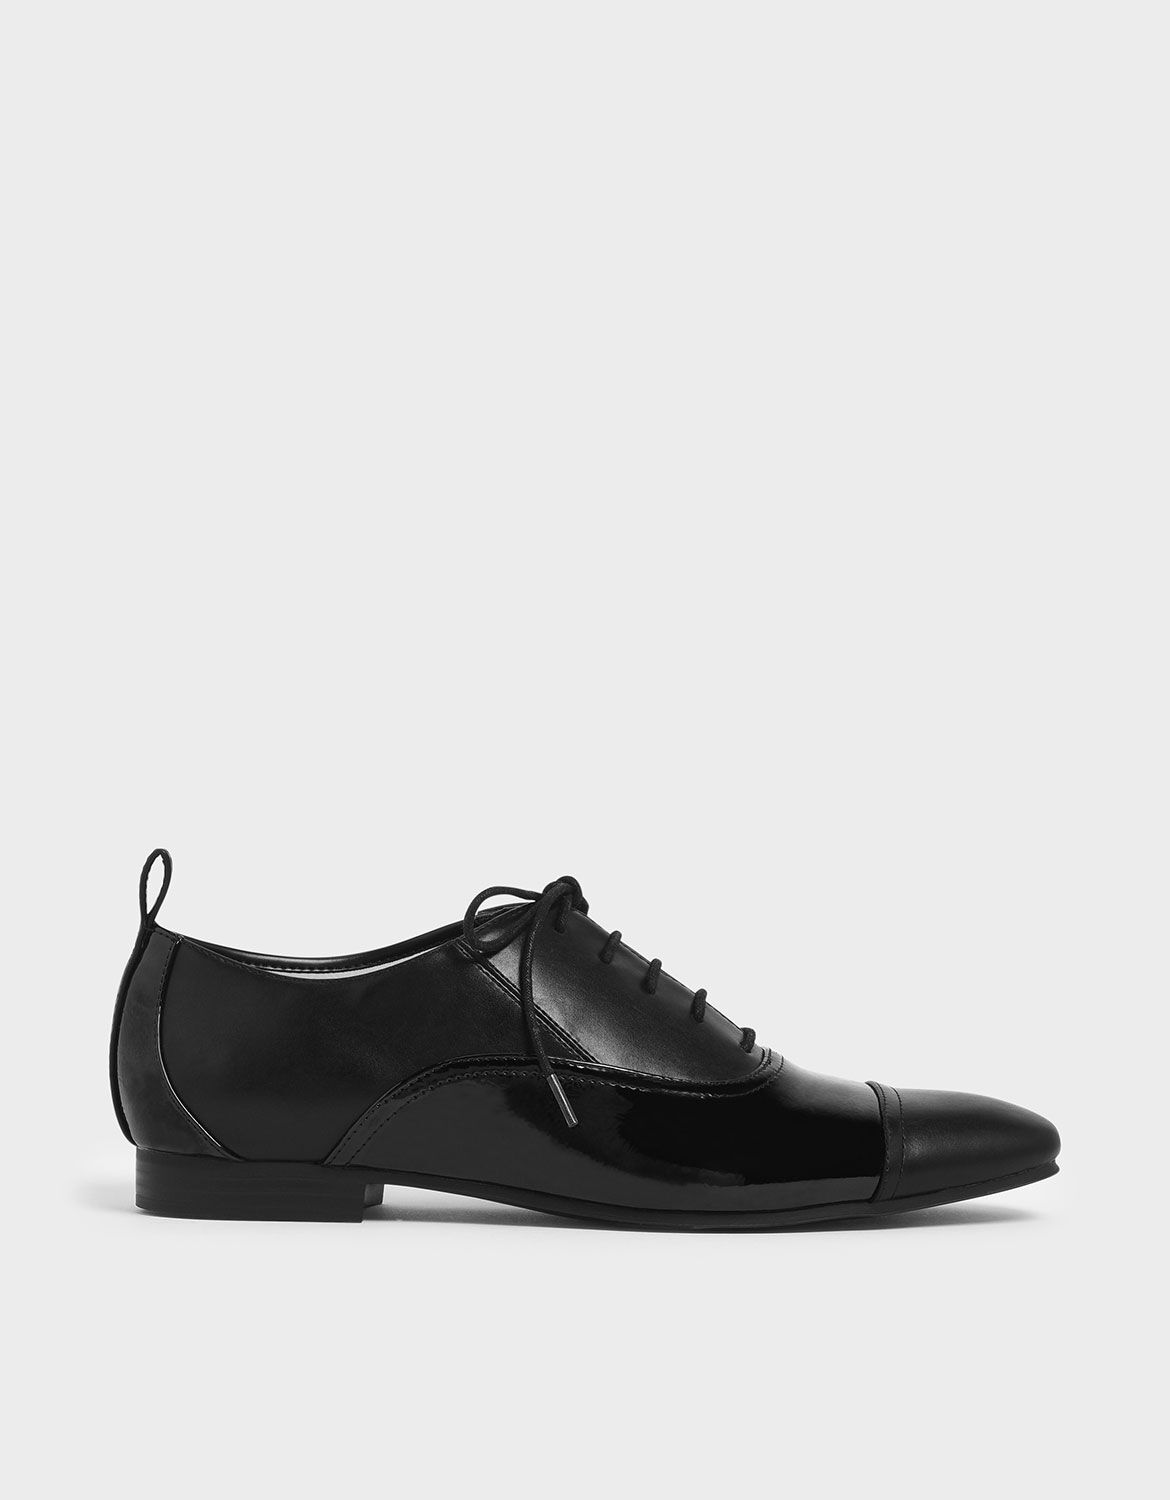 Black Wrinkled Patent Mesh Oxford Shoes 